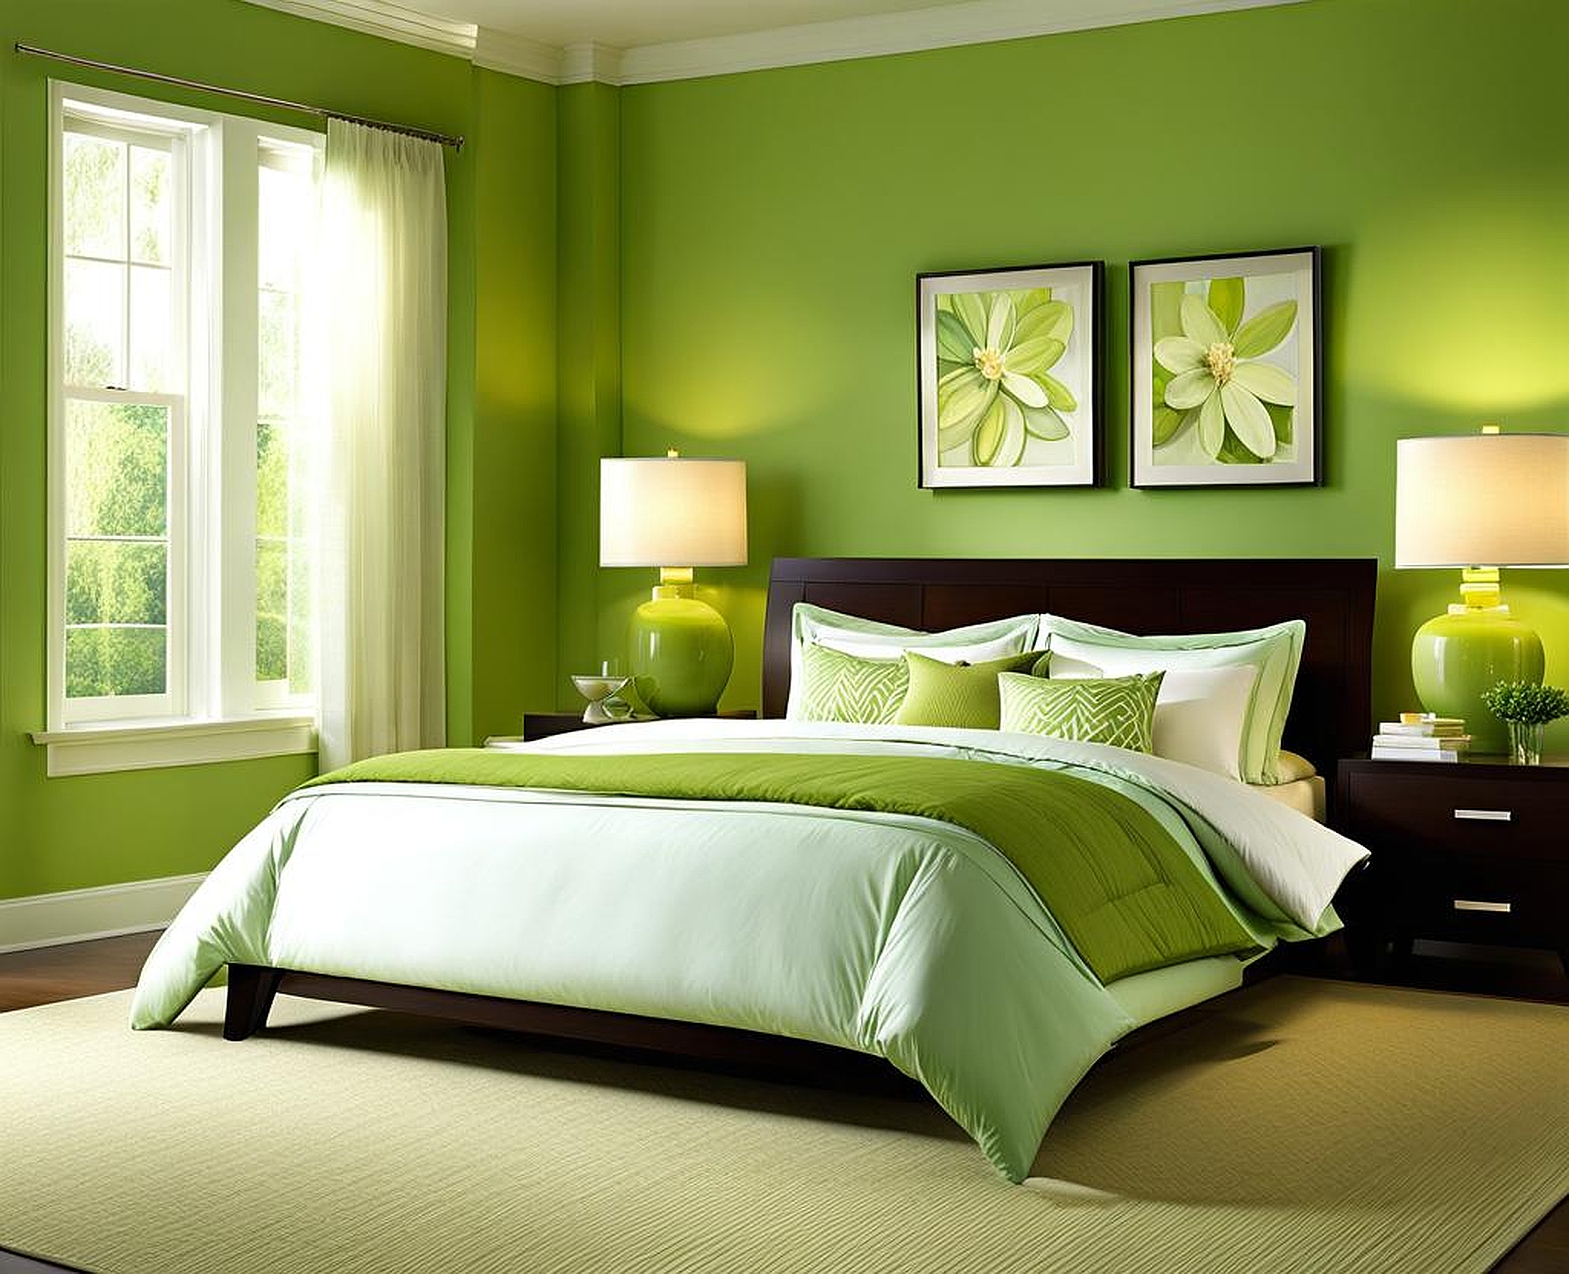 Beautiful Shades of Light Green Bedroom Paint Colors for Inspiration